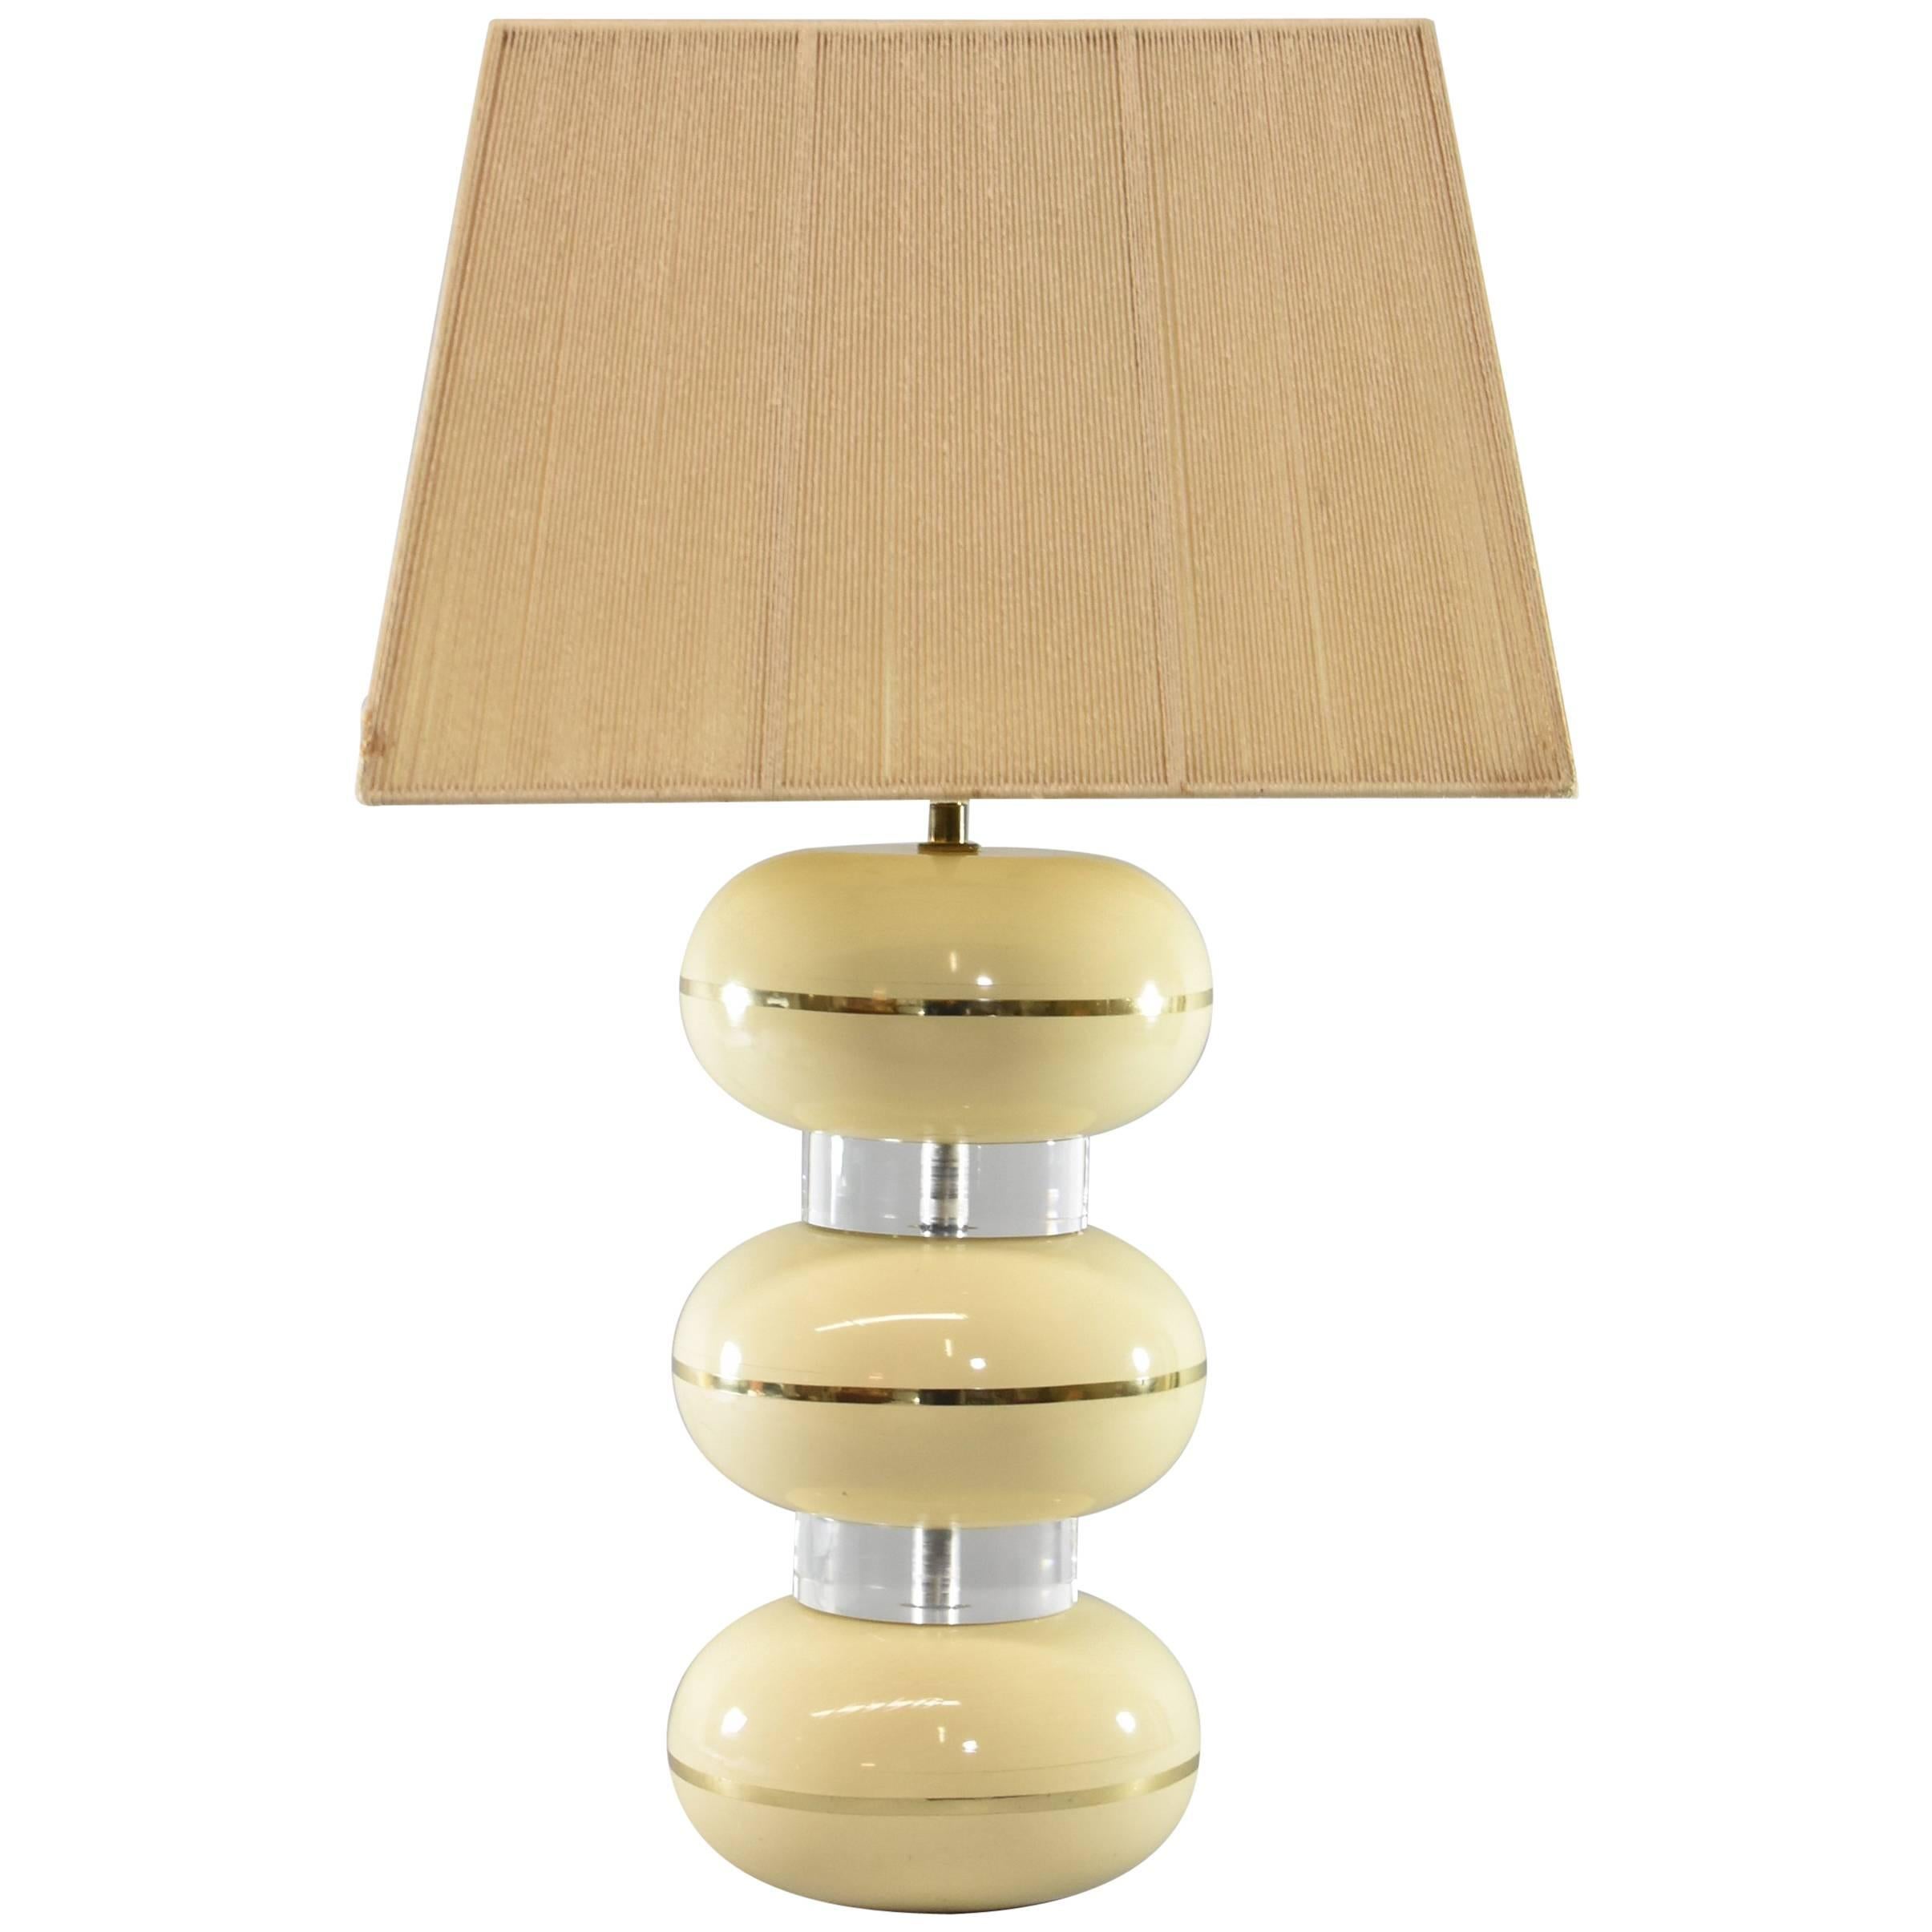 Mid-Century Modern Table Lamp with String Shade by Karl Springer For Sale